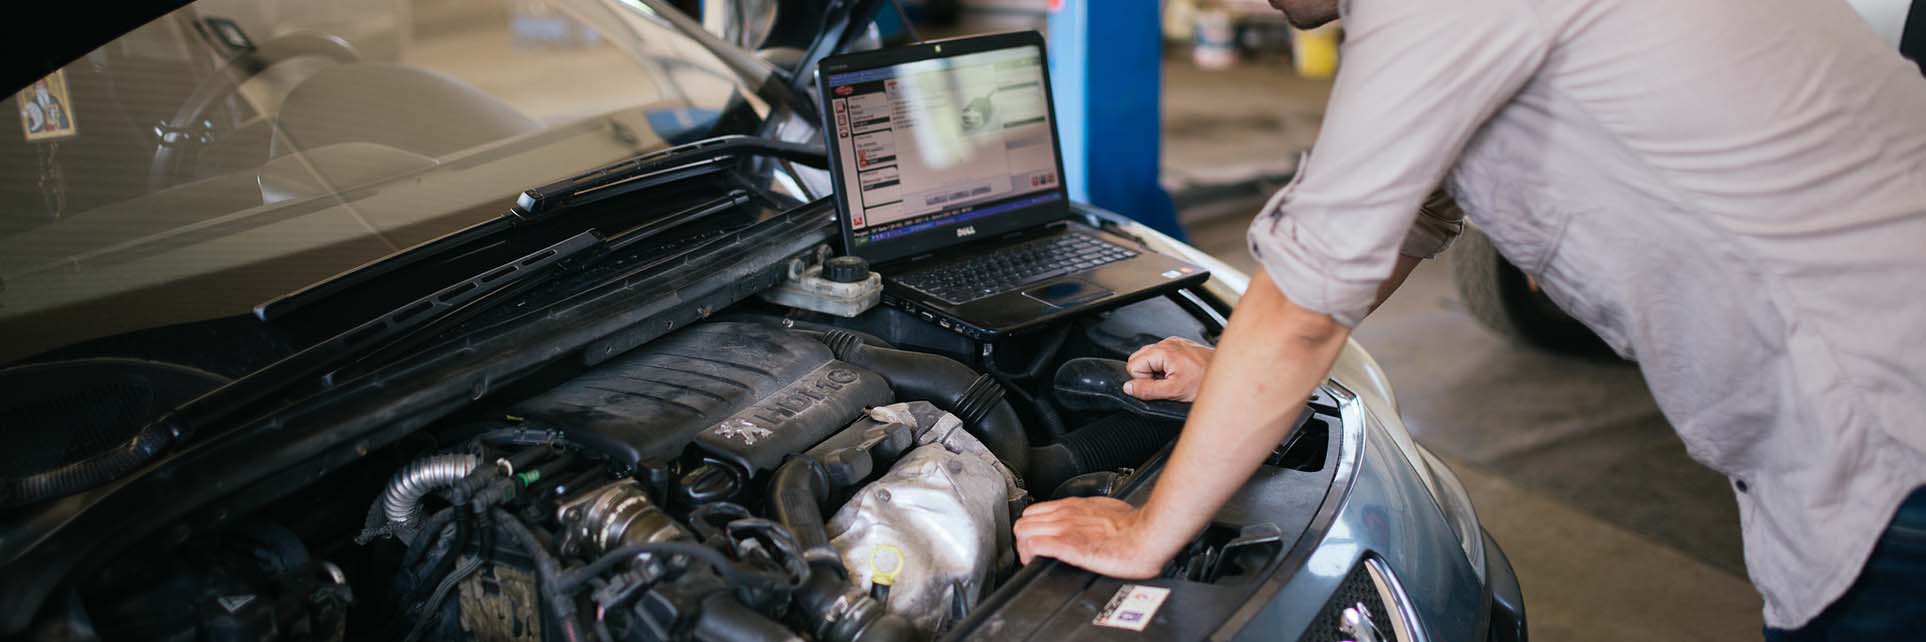 Massachusetts Will Now Enforce Auto Right to Repair Law